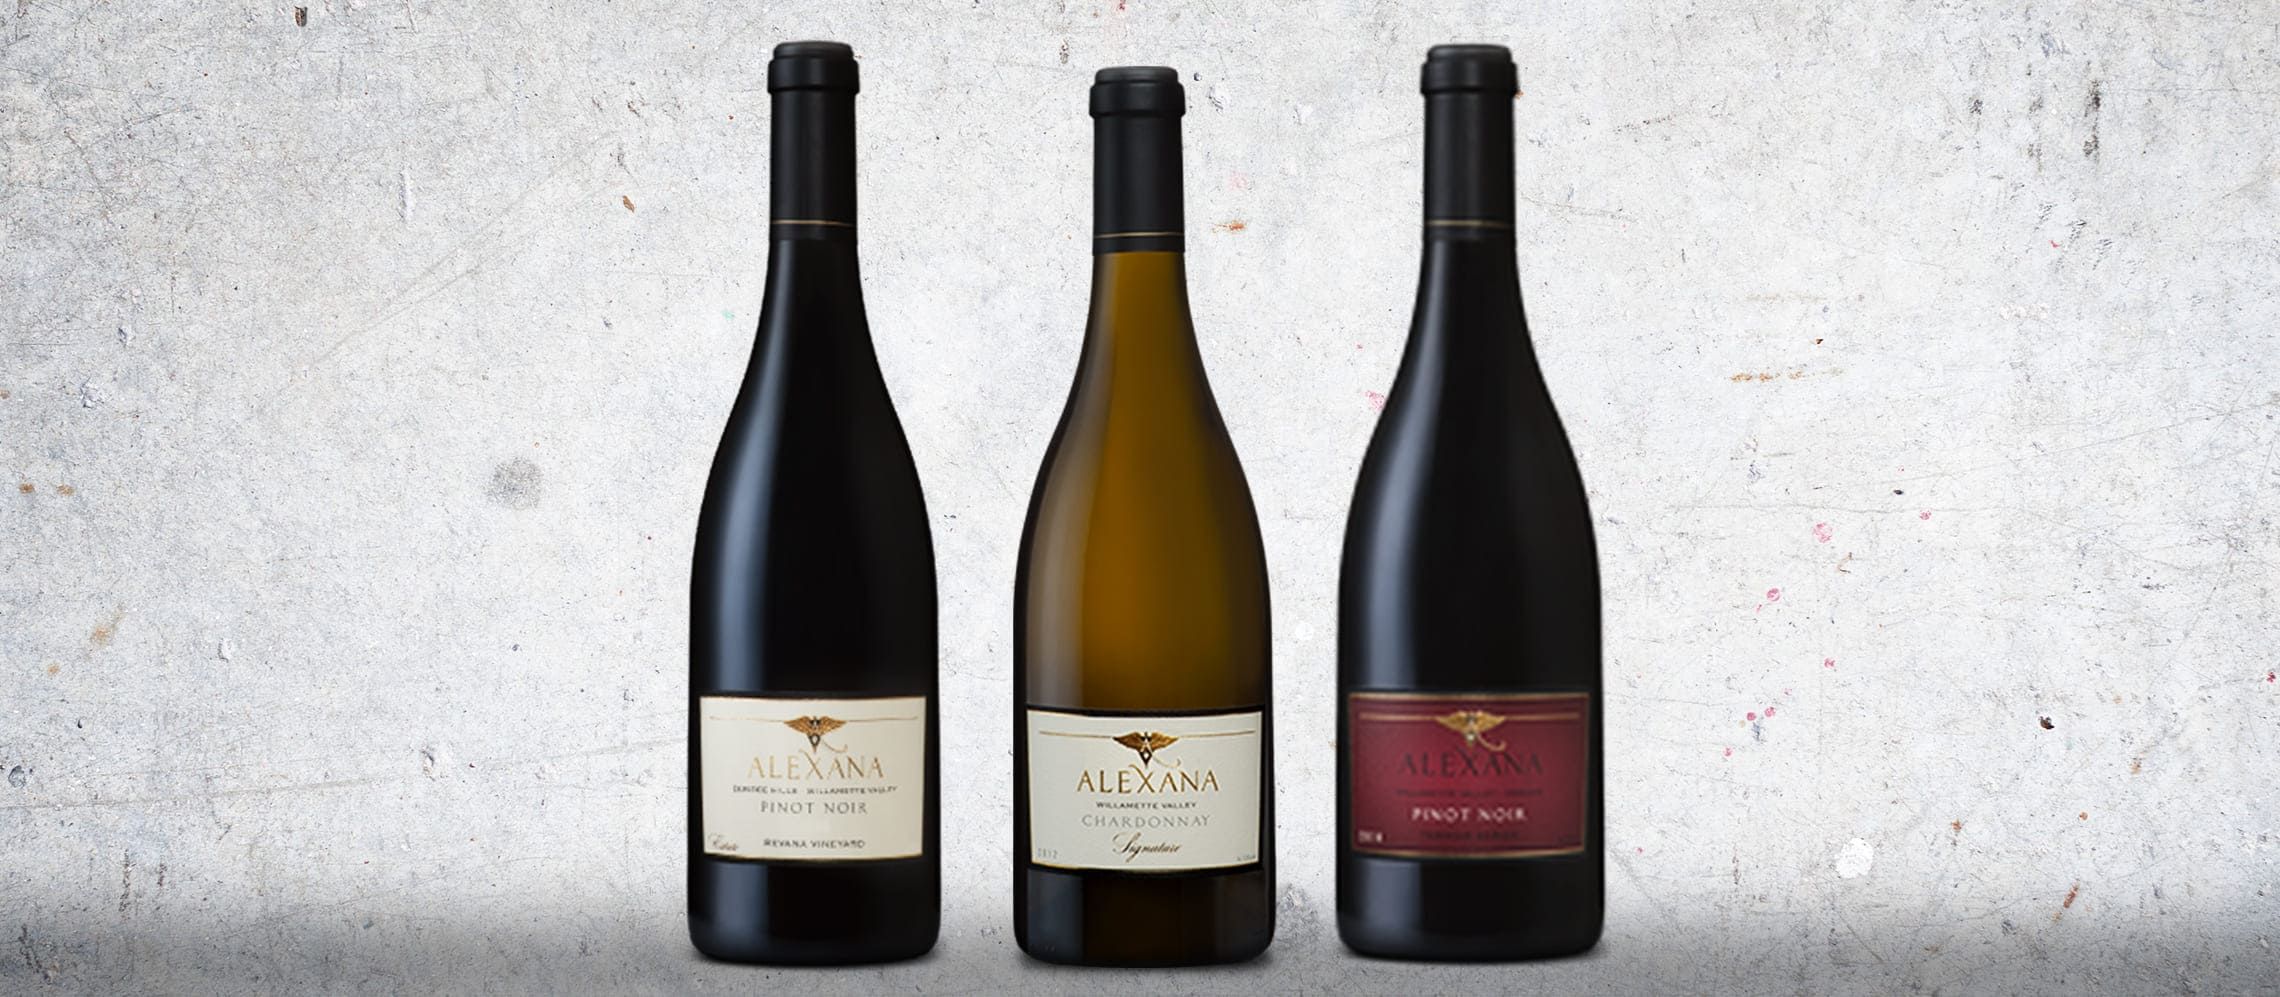 Photo for: Wines from Alexana Winery Take Home Three Medals